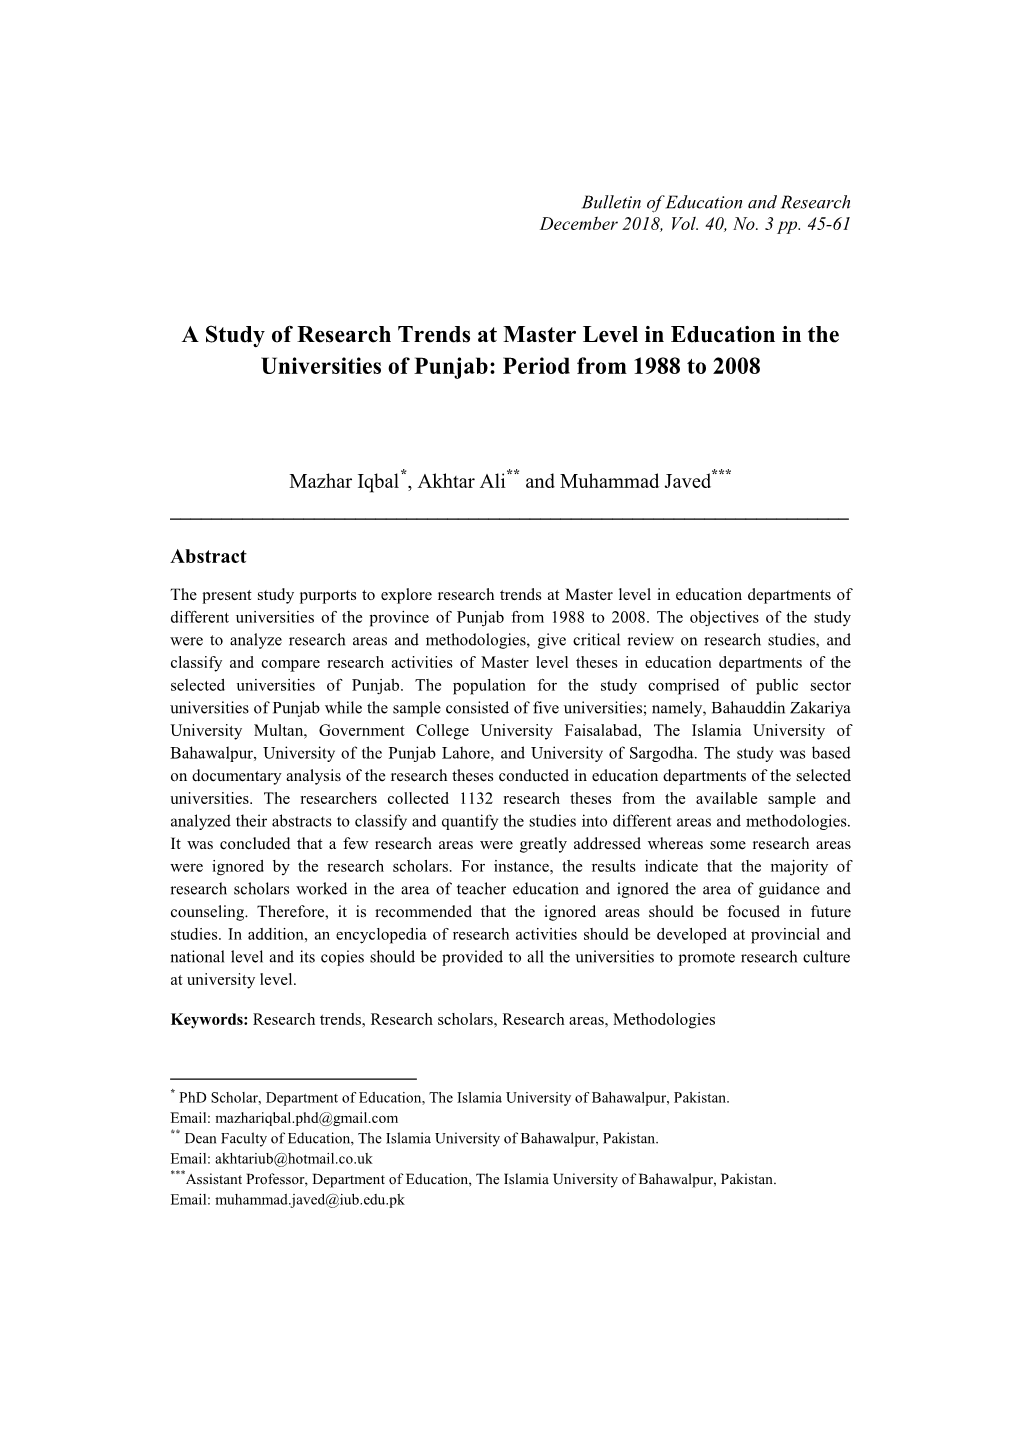 A Study of Research Trends at Master Level in Education in the Universities of Punjab: Period from 1988 to 2008